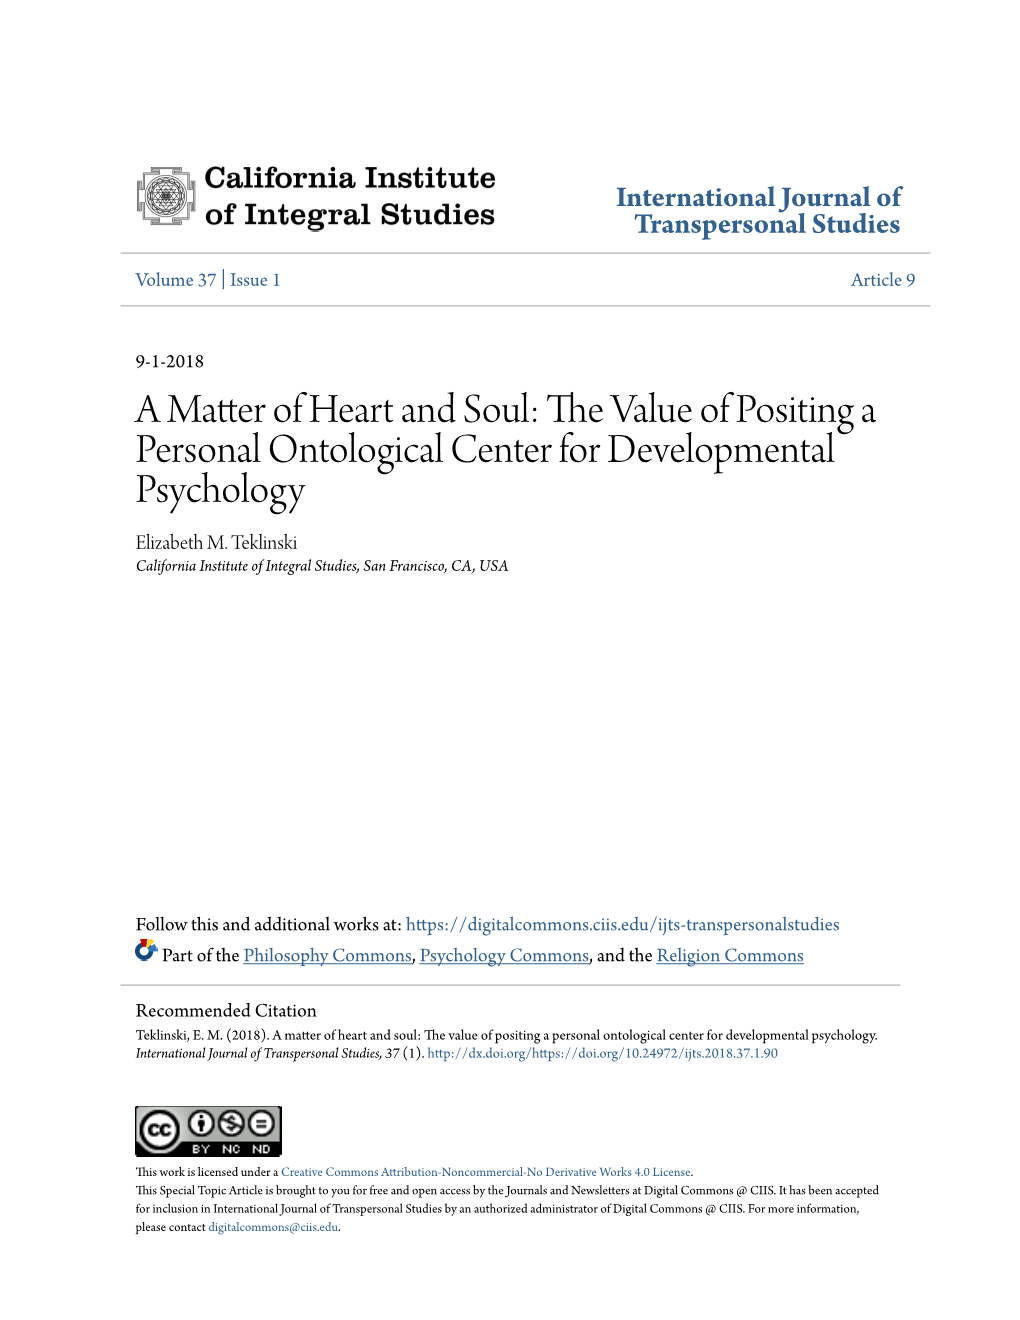 A Matter of Heart and Soul: the Value of Positing a Personal Ontological Center for Developmental Psychology Elizabeth M